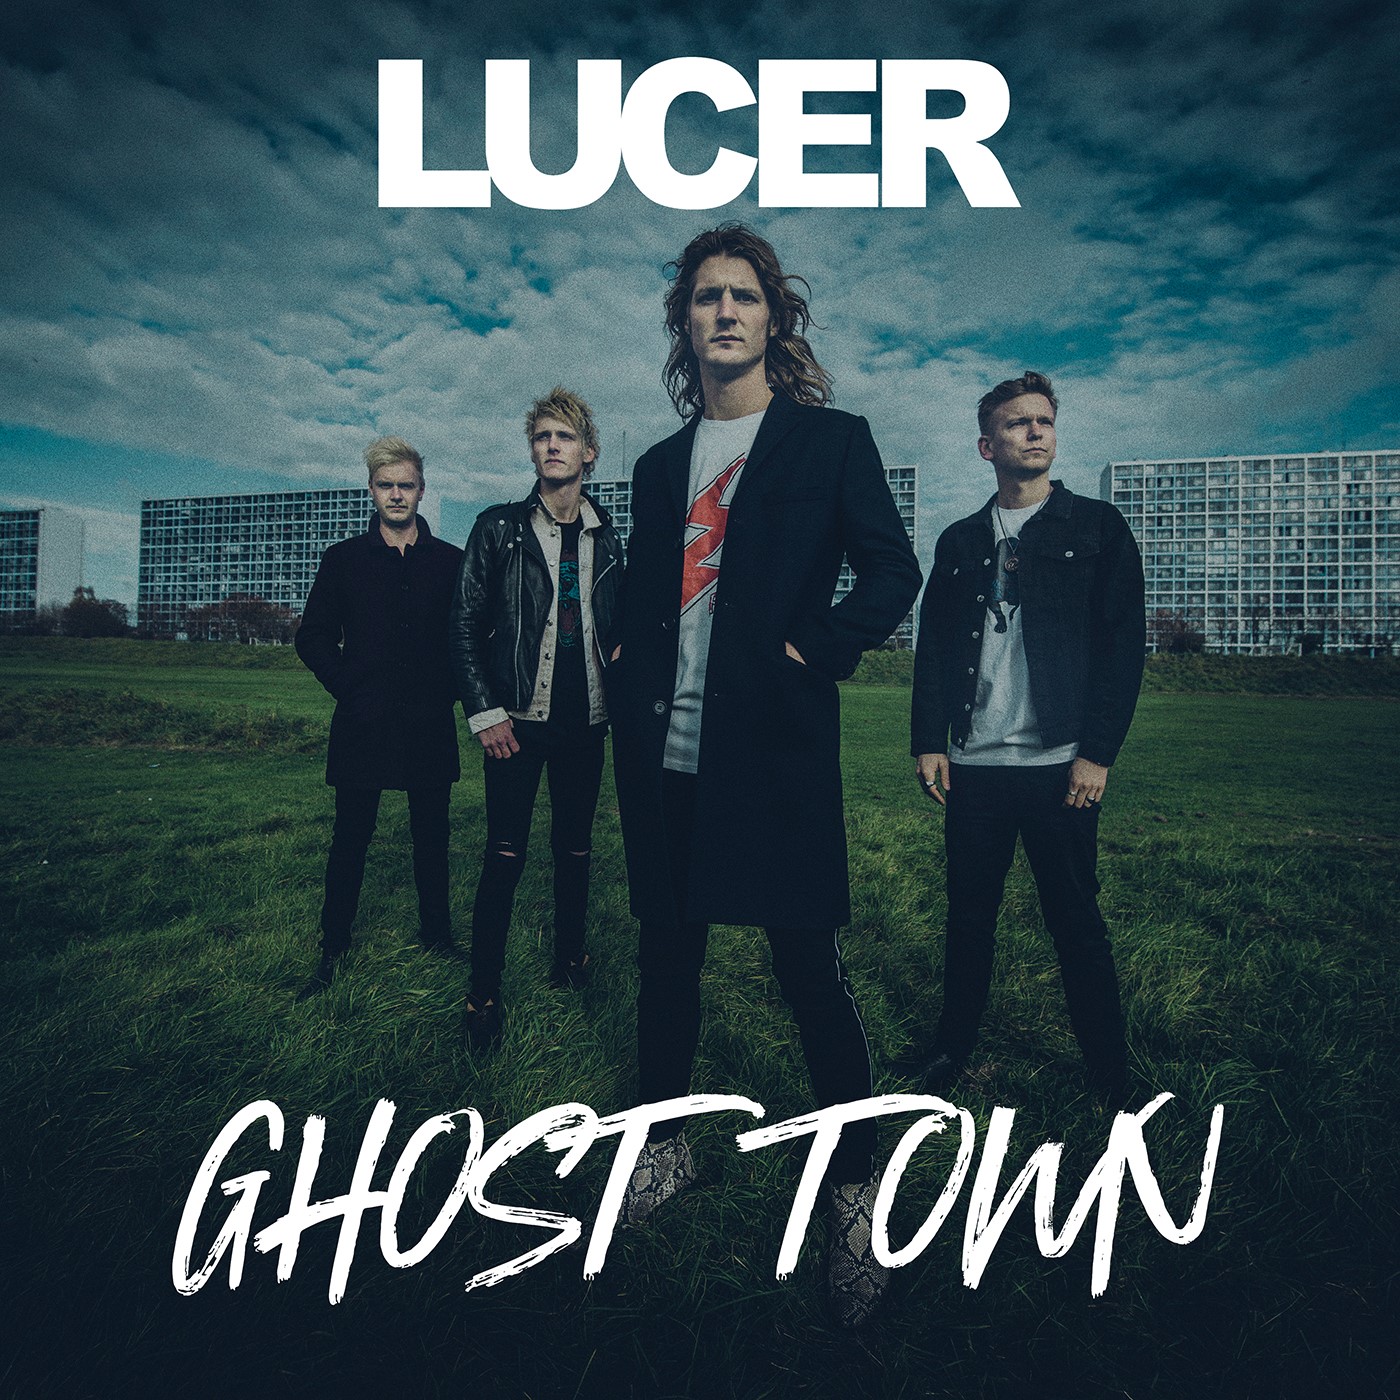 Lucer – Ghost Town